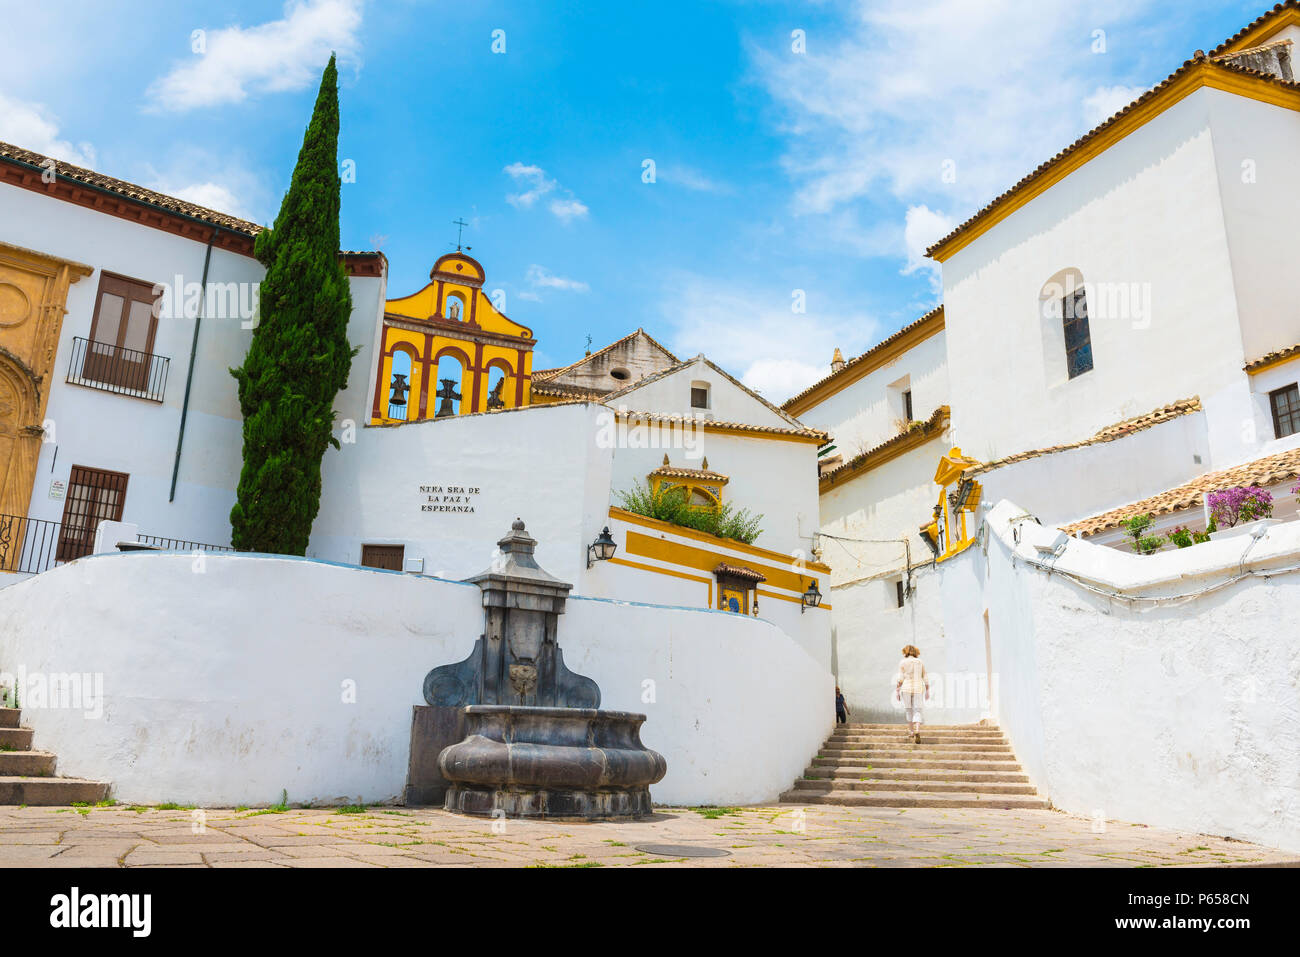 Andalucia Spain city, a woman walks through a section of the old town in Cordoba containing typical white Andalucian buildings, Andalucia Spain. Stock Photo